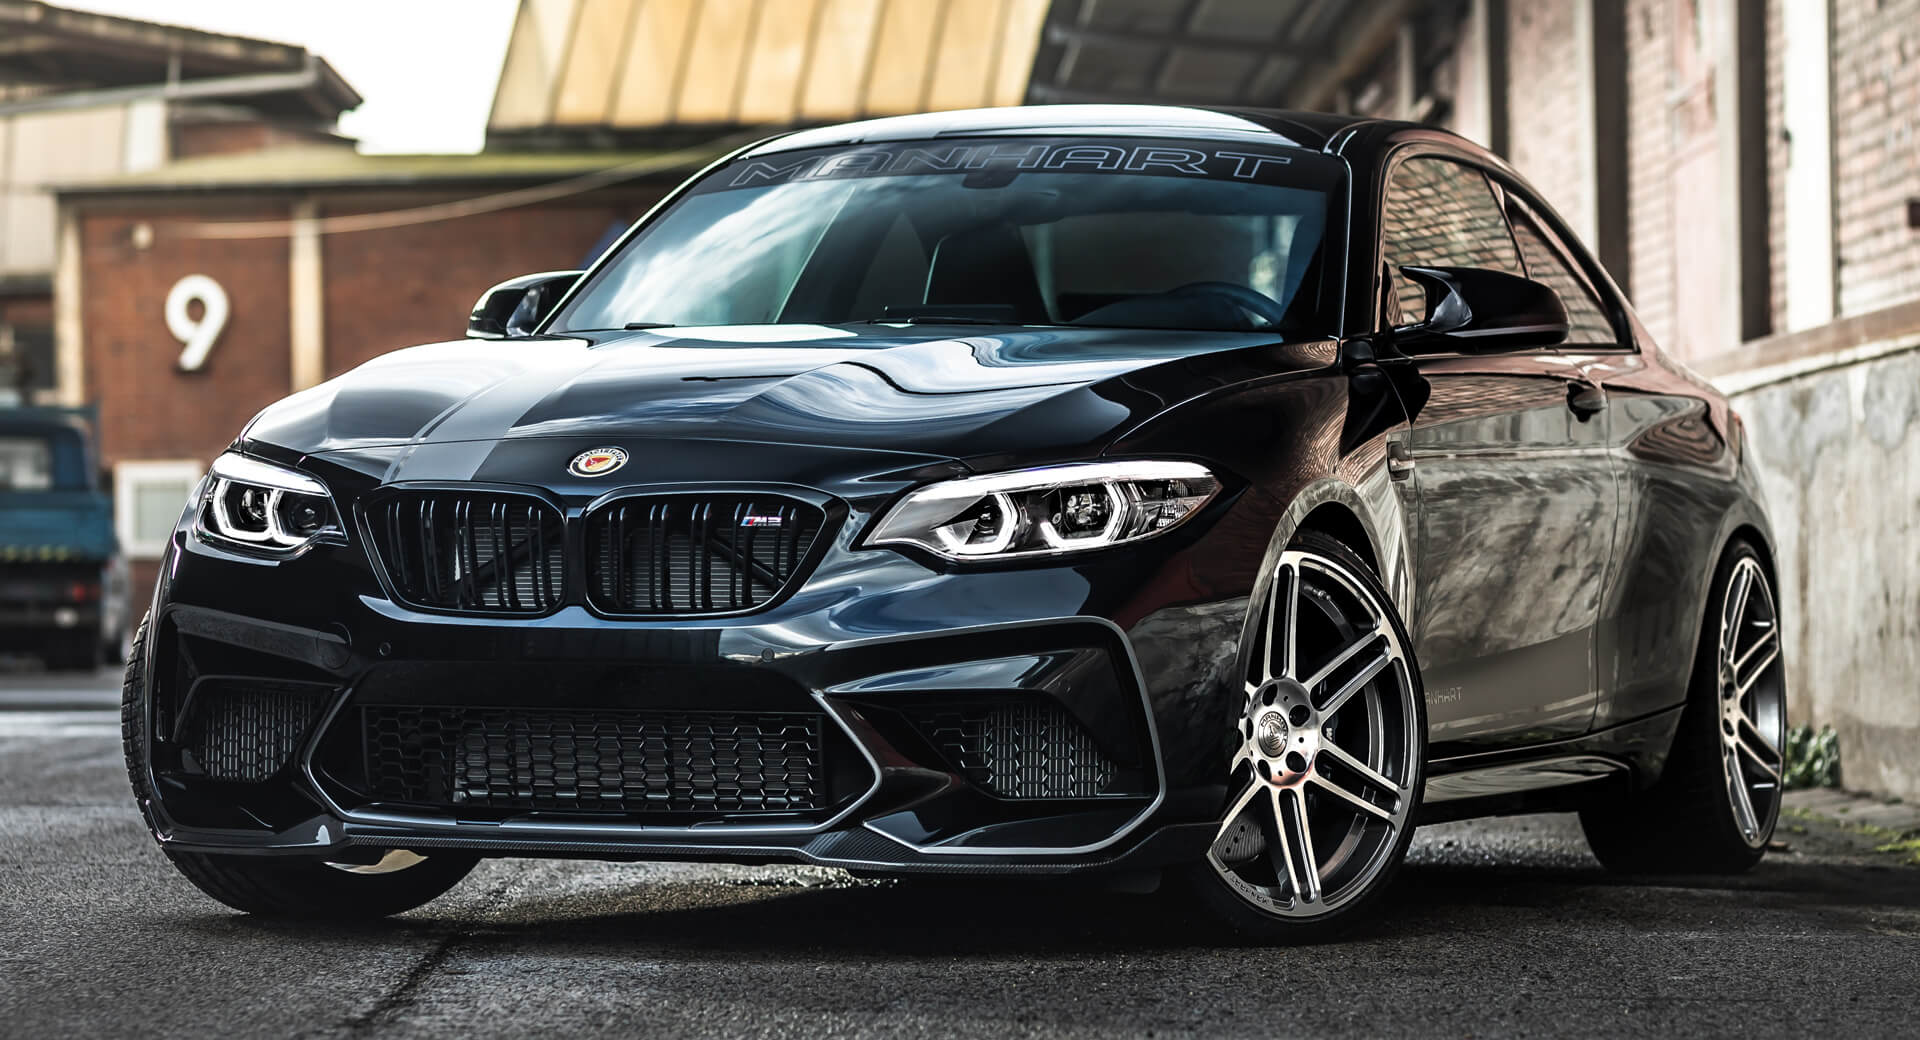 Manhart S Bmw M2 Competition Tune Is As Badass As It Looks 45 Off